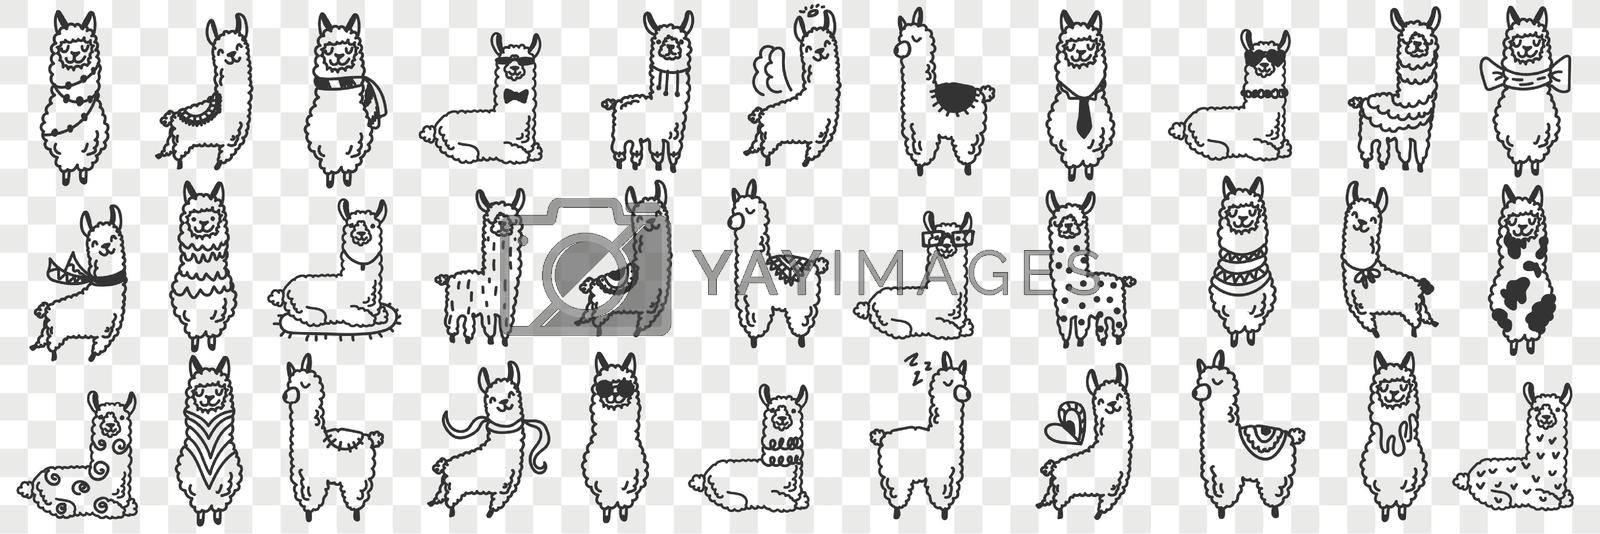 Funny alpacas animals doodle set. Collection of hand drawn various funny cute alpaca animals in different poses enjoying life isolated on transparent background